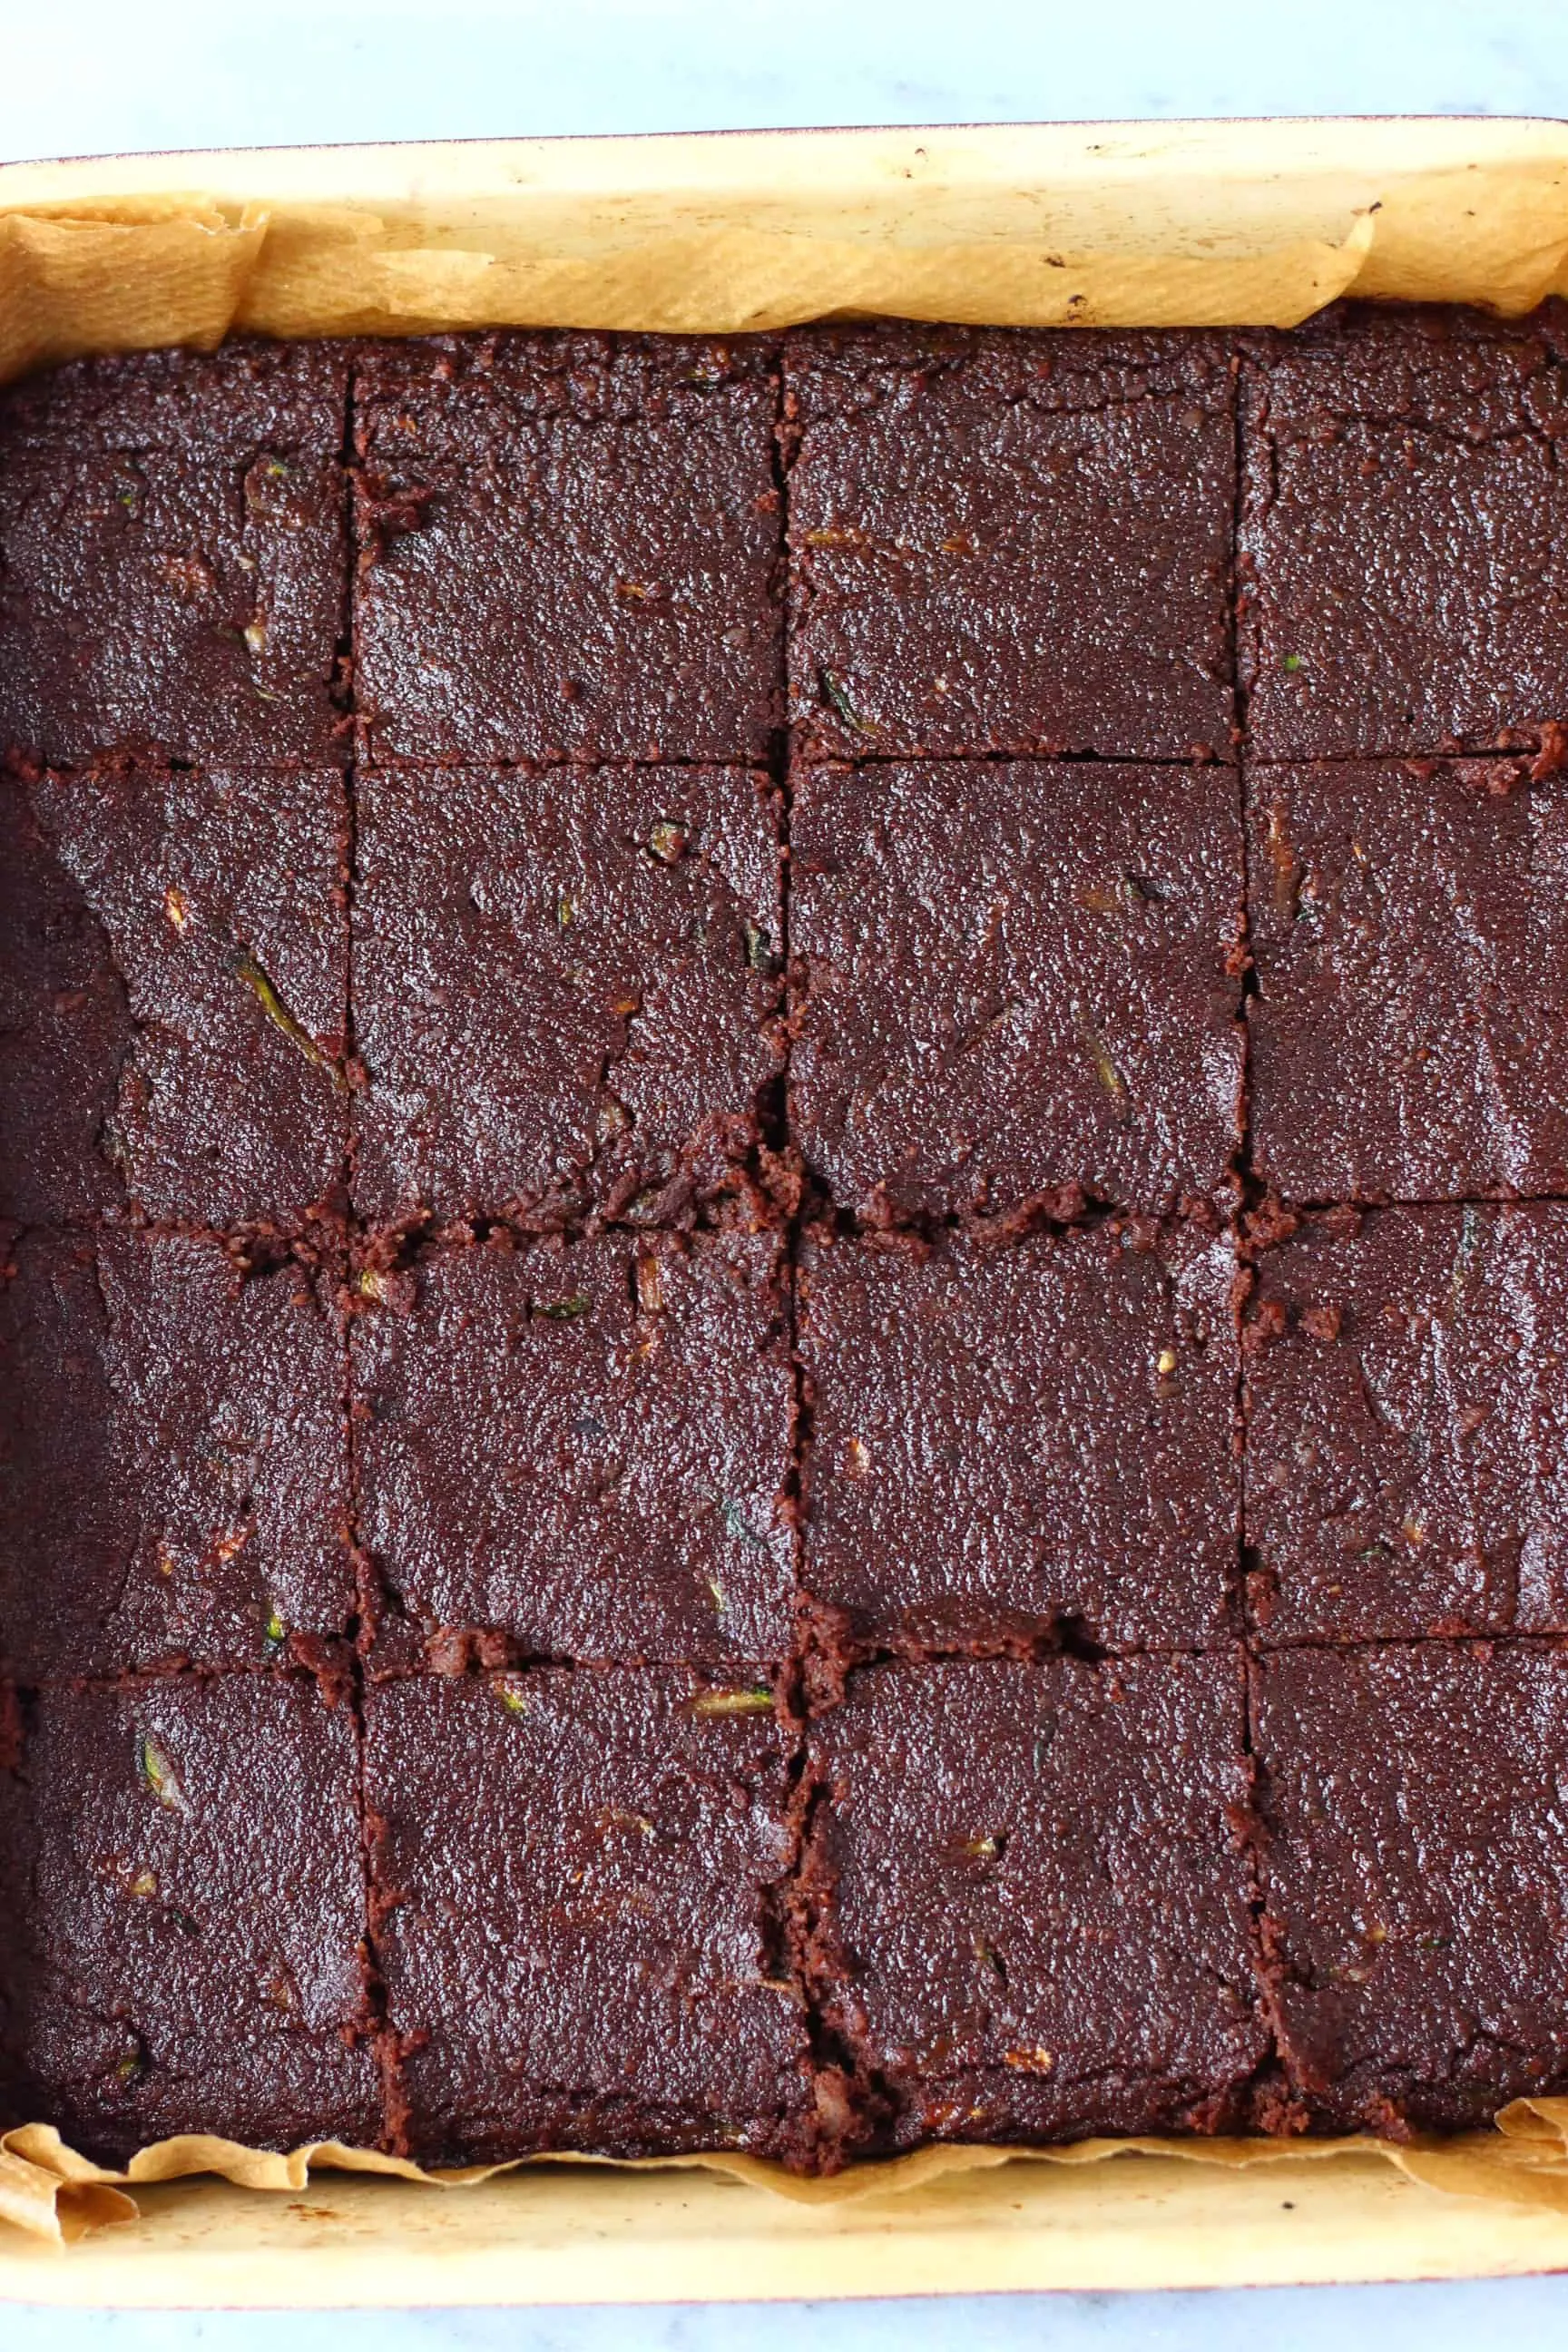 Vegan zucchini brownies in a square baking tray cut into 16 pieces against a marble background